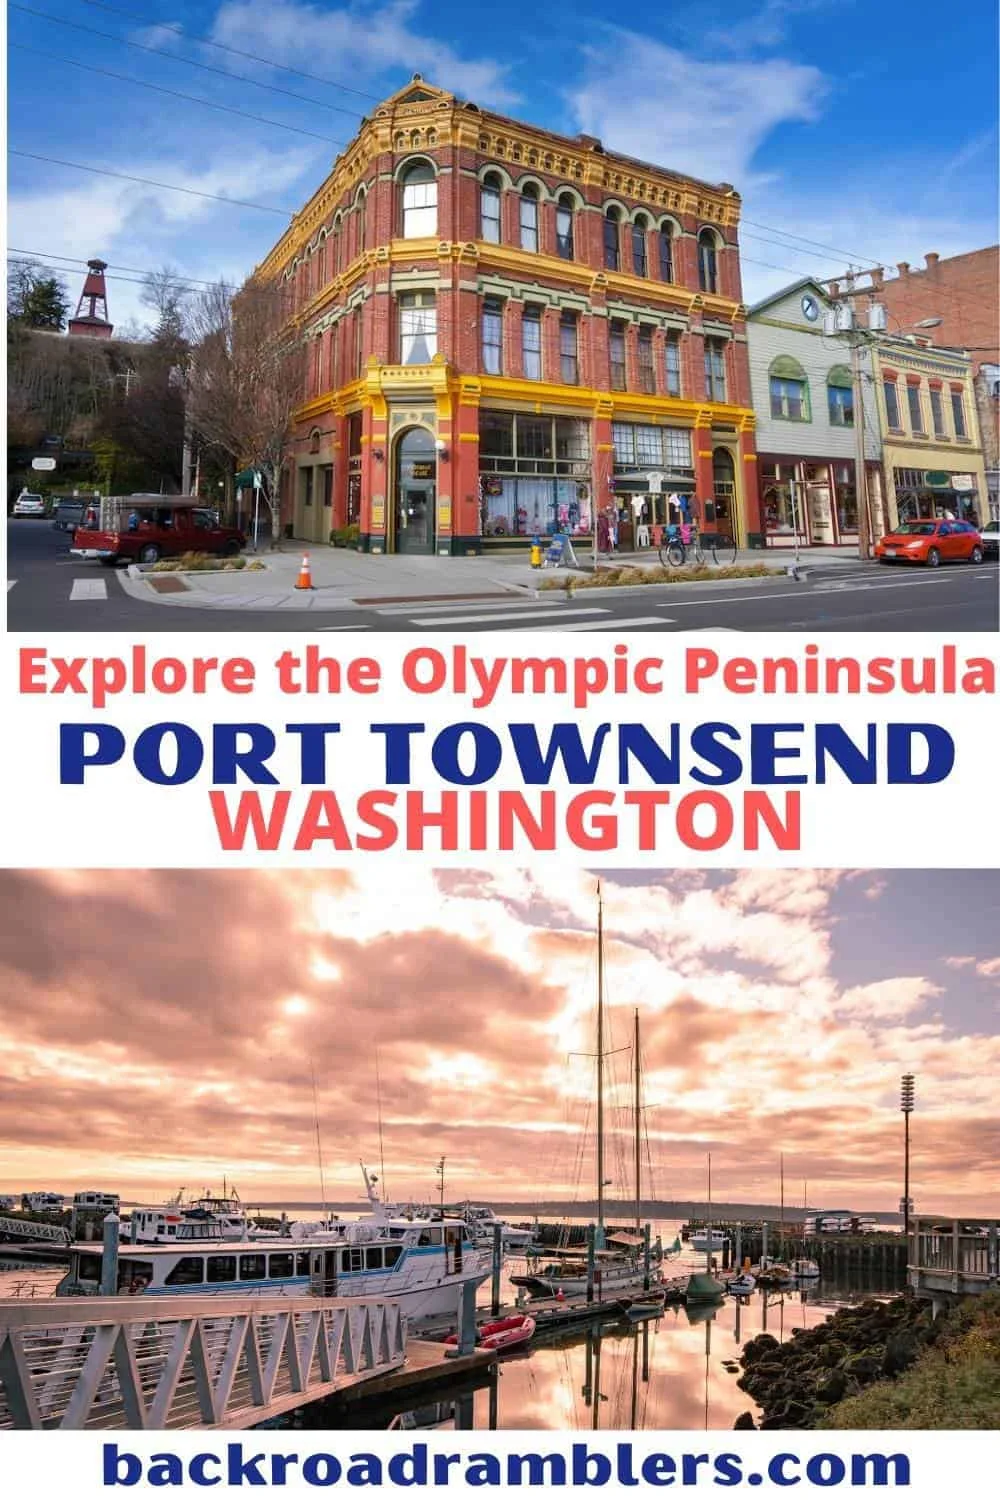 A collage of photos featuring downtown Port Townsend, Washington. Text overlay: Explore the Olympic Peninsula - Port Townsend, Washington